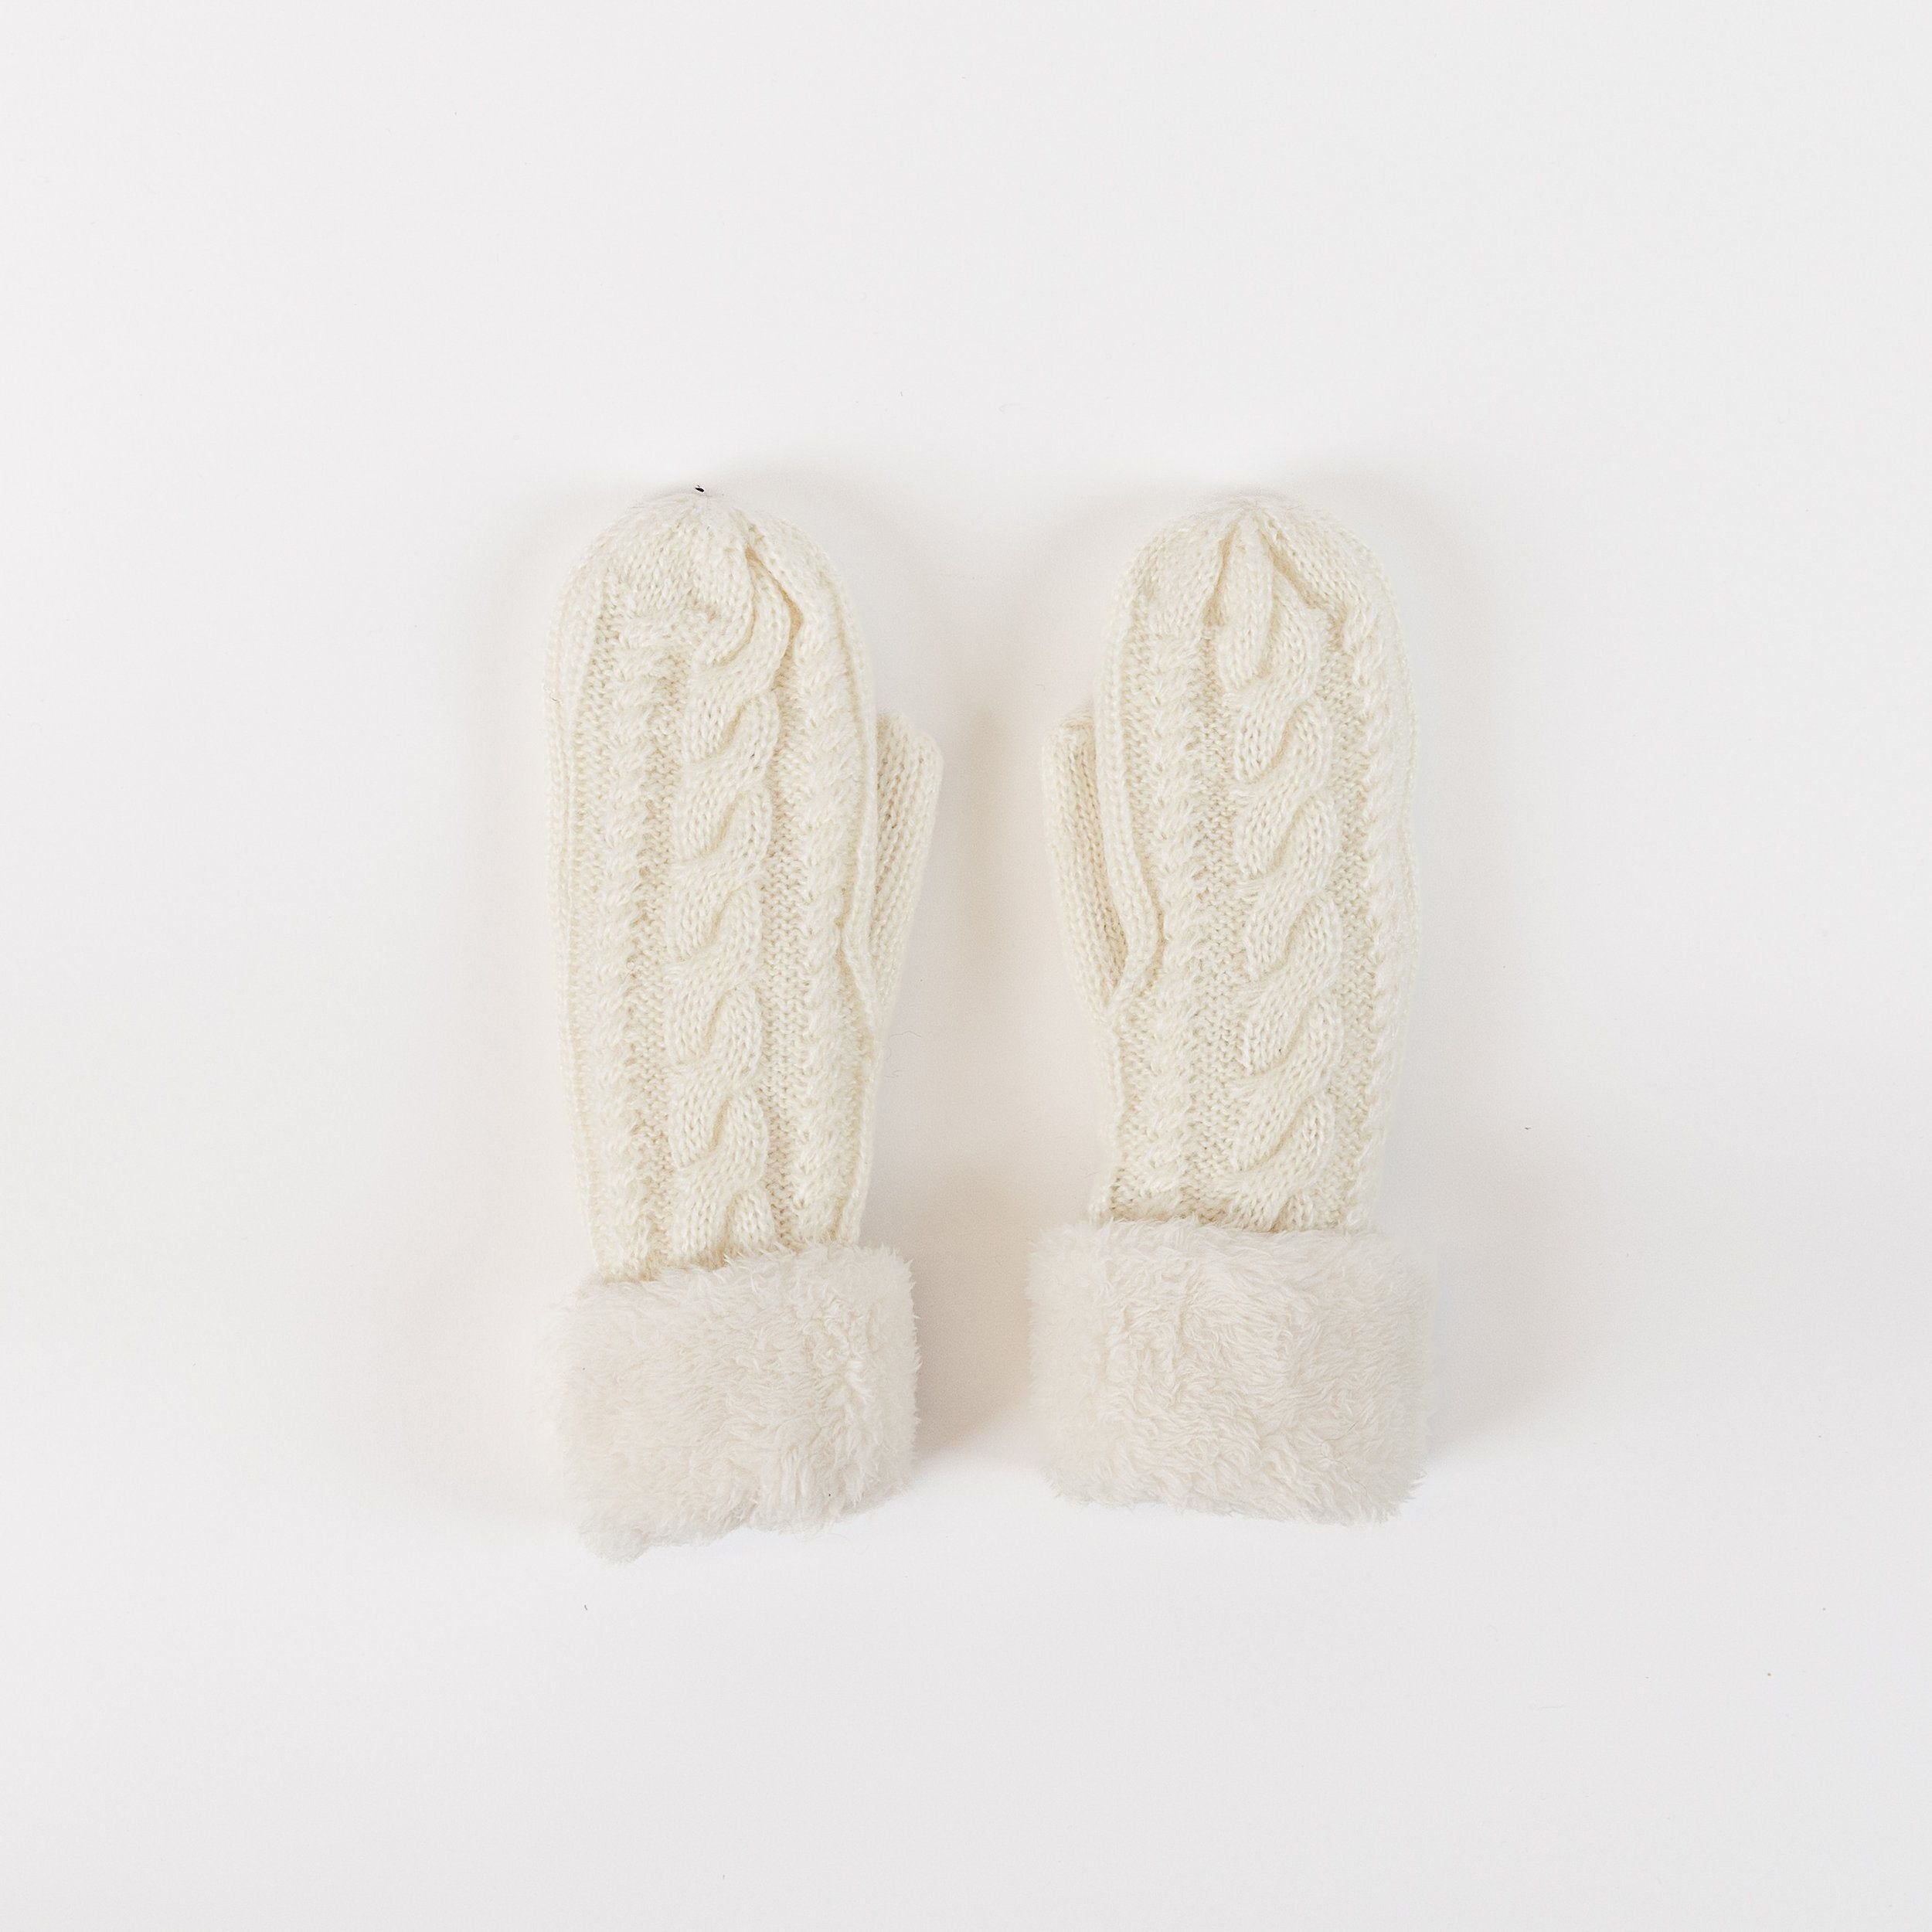 Lyla & Luxe - Cable Mitten in White